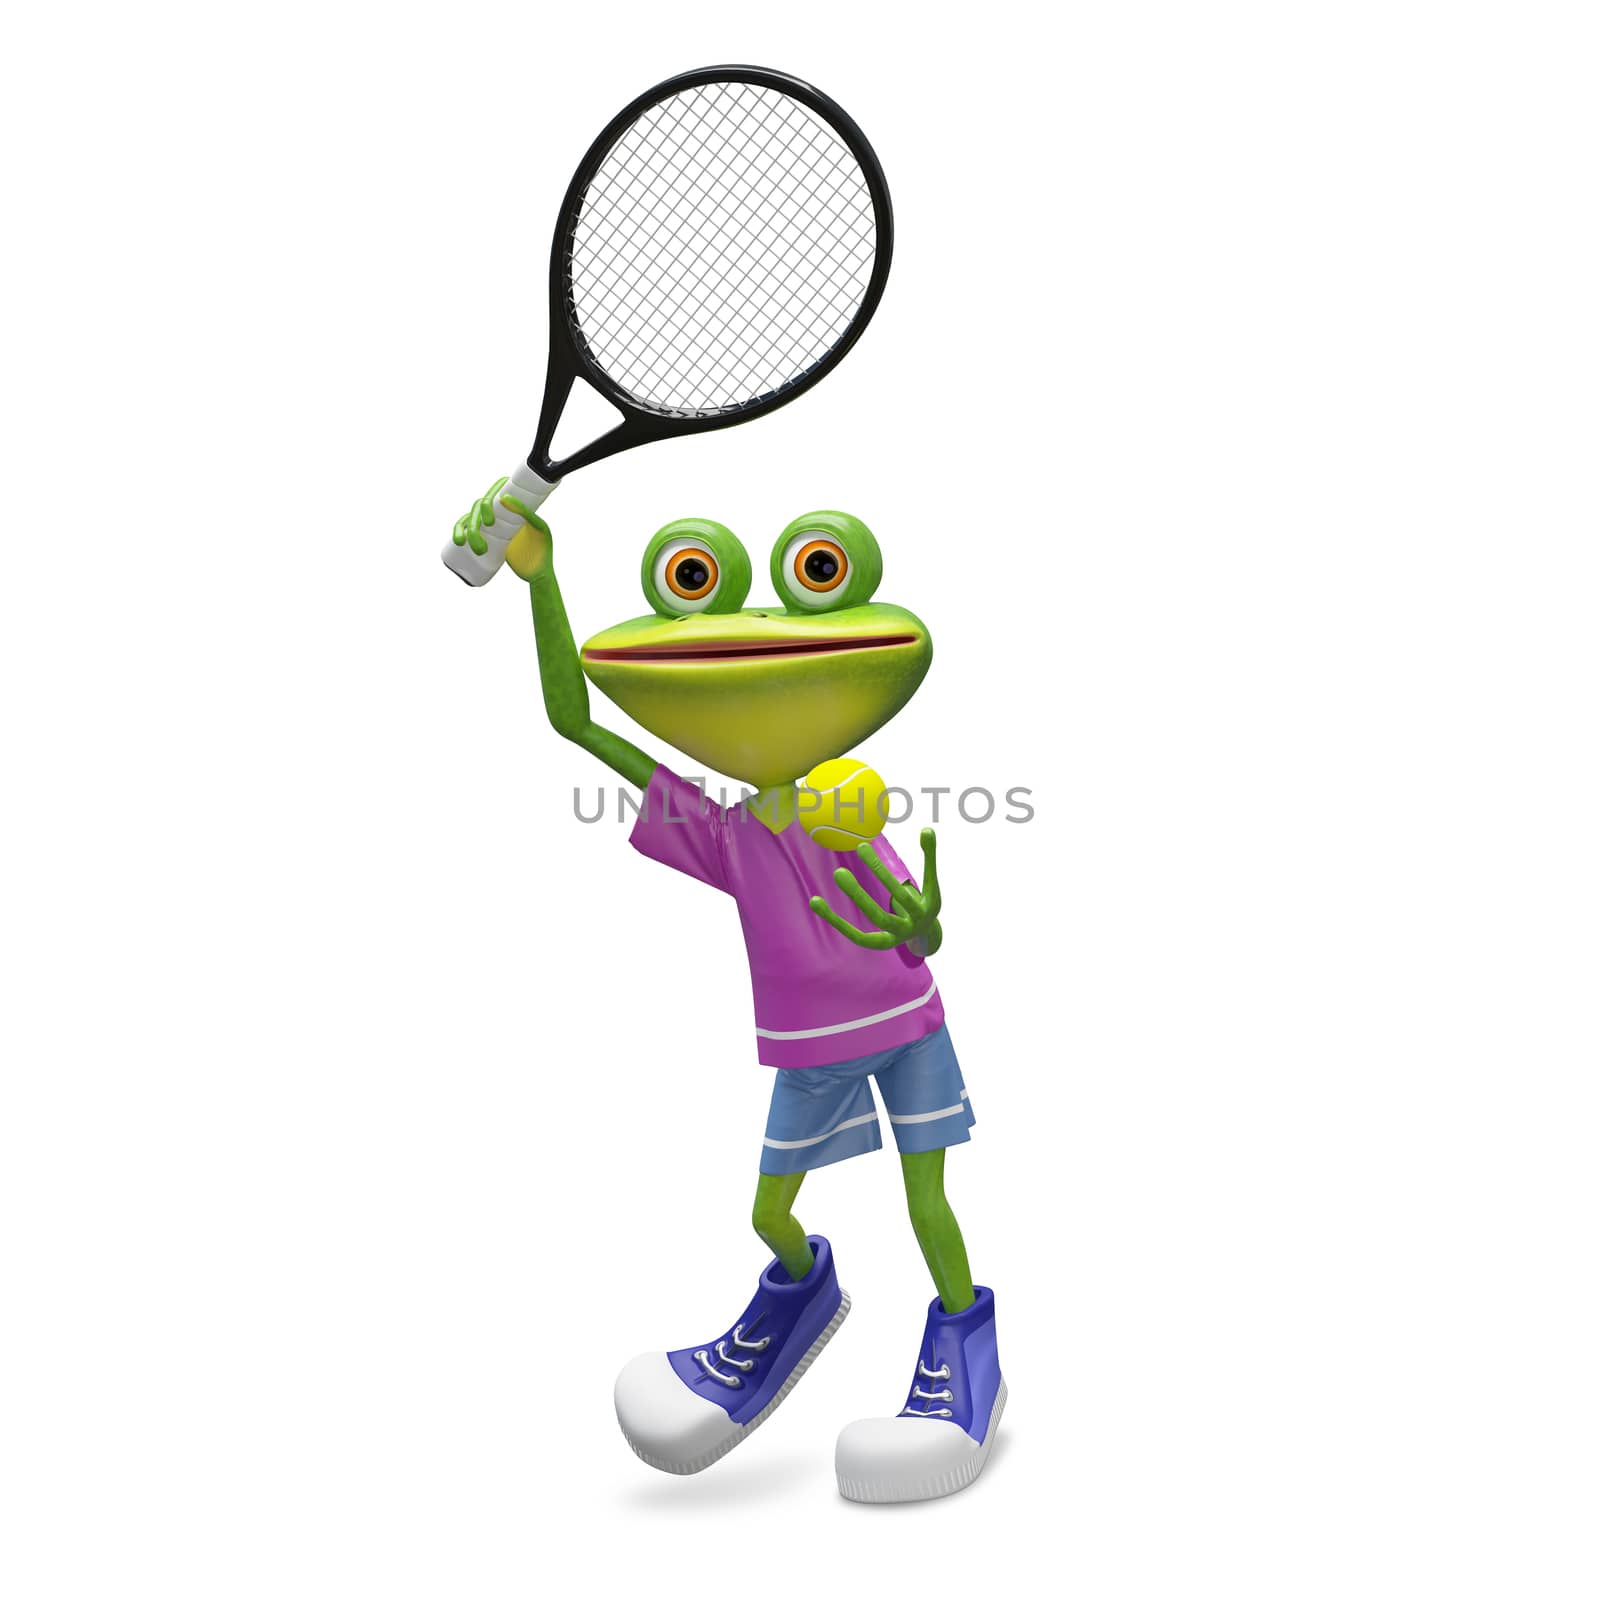 3D Illustration Frog with Tennis Racket by brux